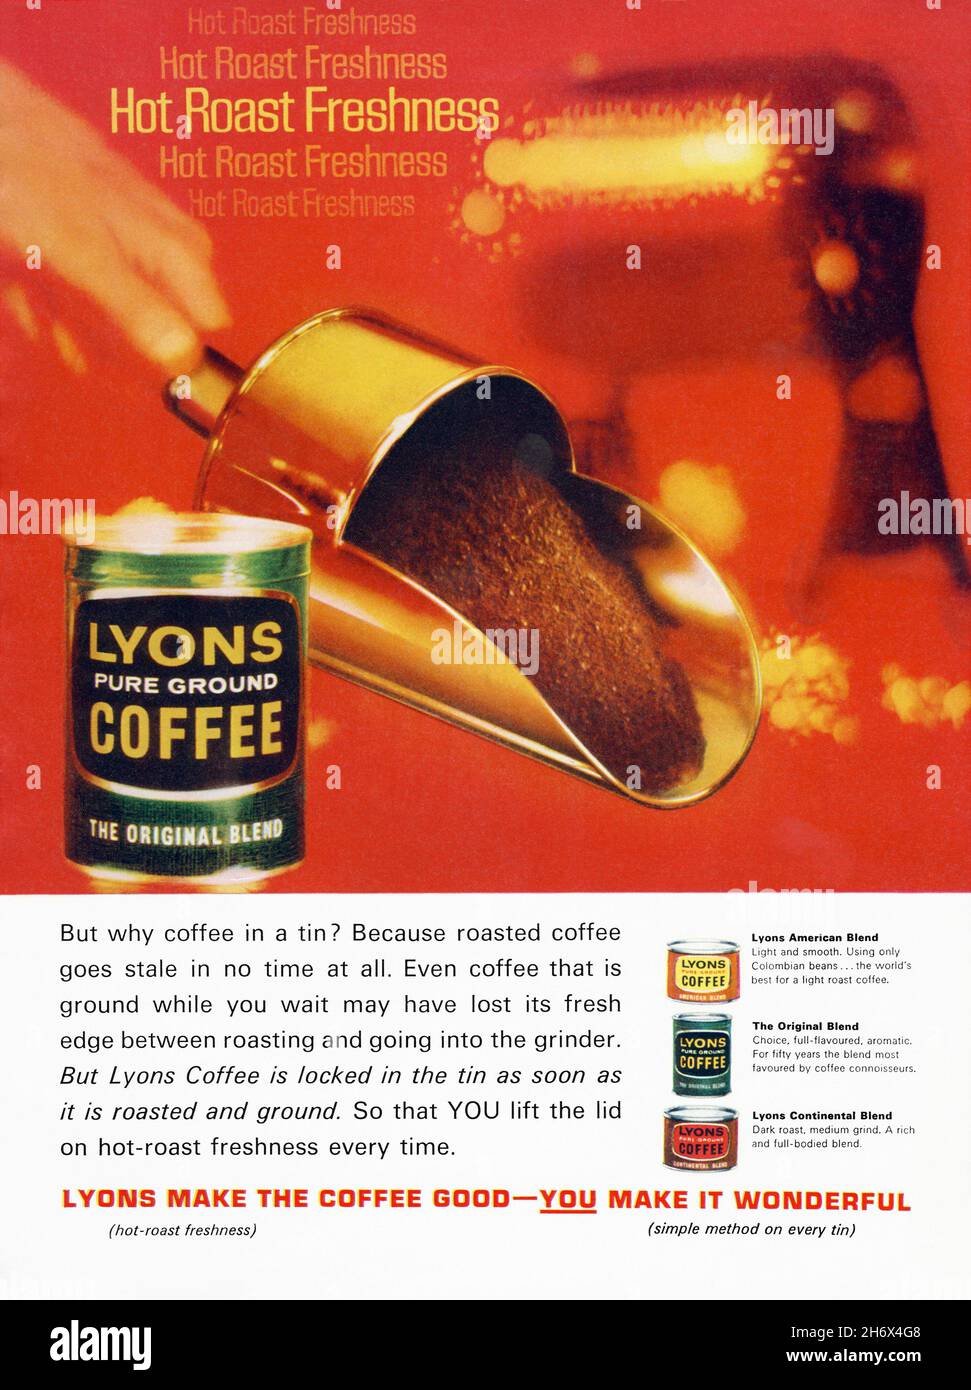 A 1960s advert for Lyons pure ground coffee. The advert appeared in a magazine published in the UK in March 1965. The photographs show various tins of the product blends, with the words emphasising the coffee’s freshness. J Lyons & Co. was a British restaurant chain, food manufacturing, and hotel conglomerate founded in 1884. In 1978 Lyons was acquired by Allied Breweries and became part of Allied Lyons. It fell on hard economic times in the late 1980s and was broken up and parts of the business sold to various companies – vintage 1960s graphics for editorial use. Stock Photo